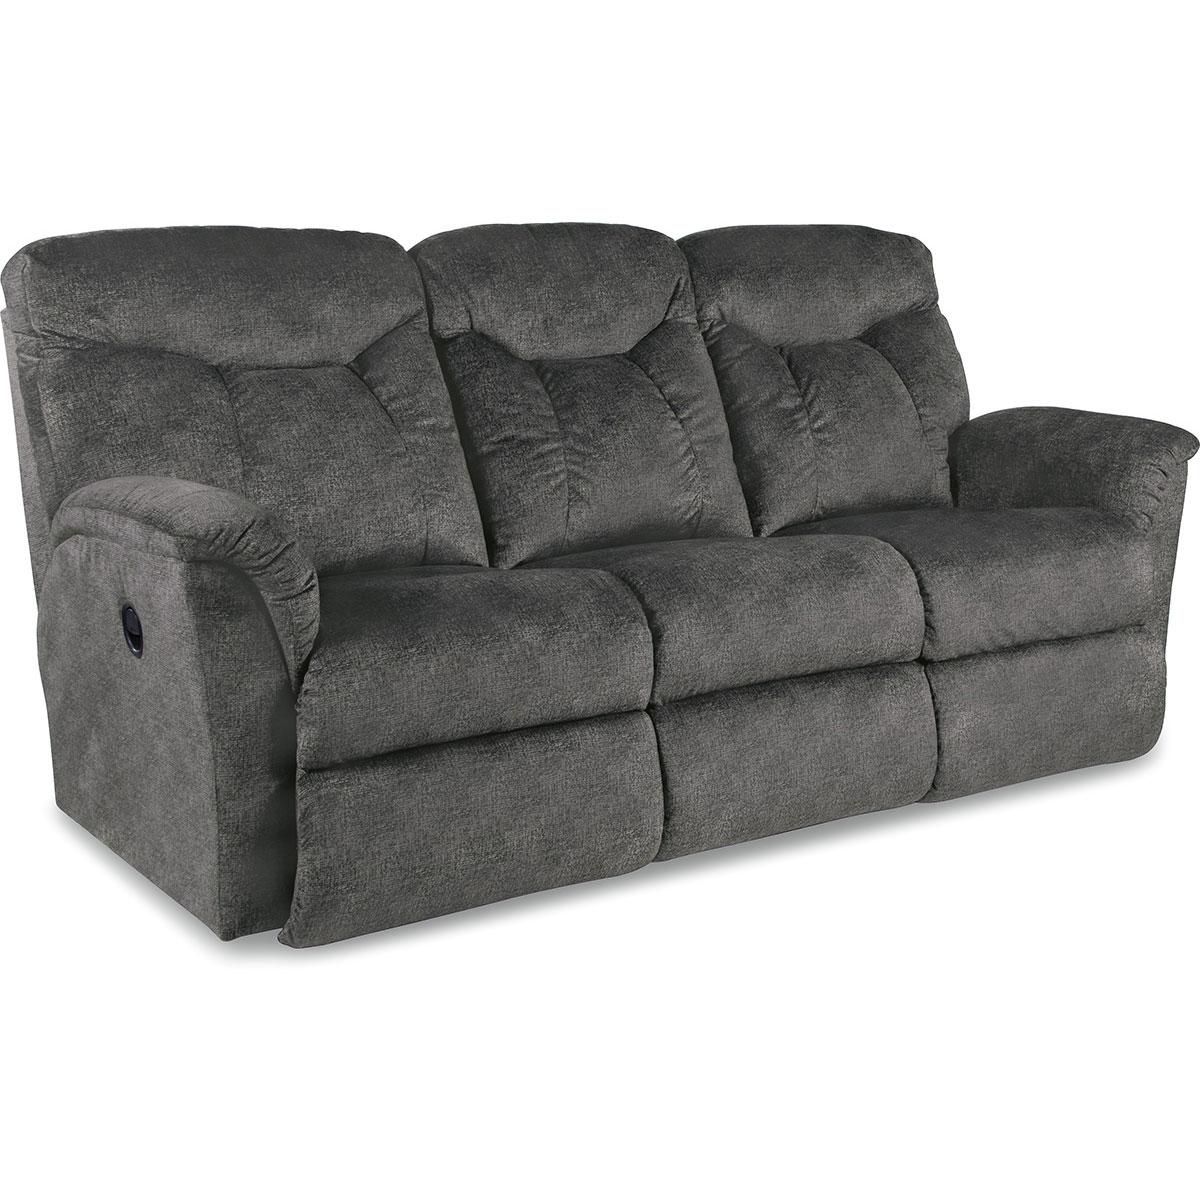 Fortune La Z Time® Full Reclining Sofa In Lazy Boy Sofas (View 6 of 20)